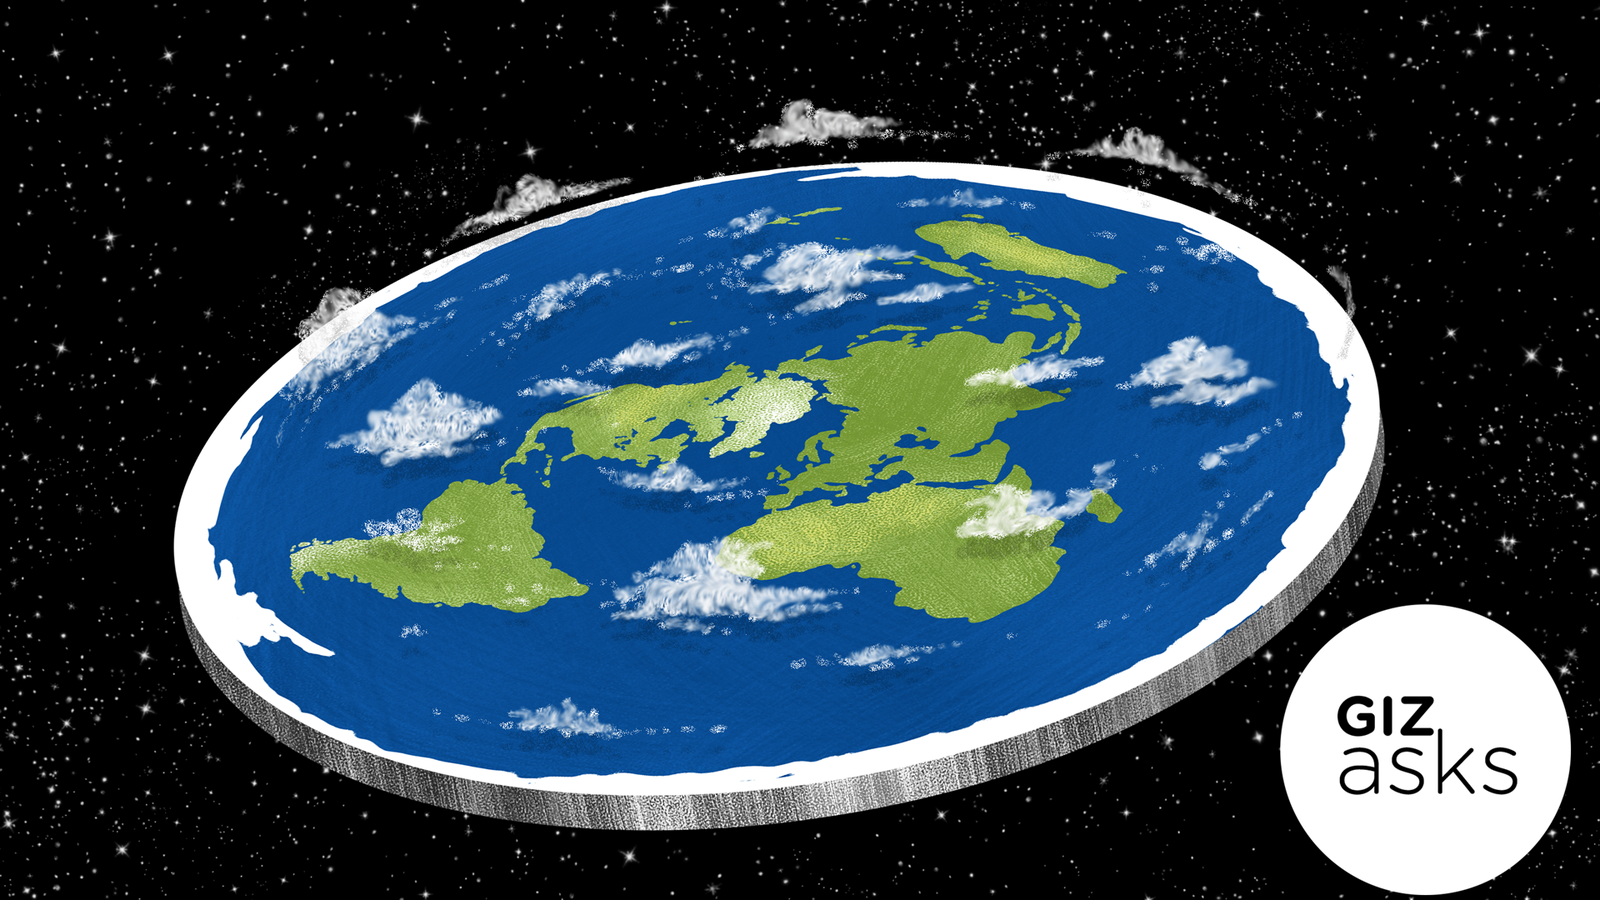 what do flat earthers think